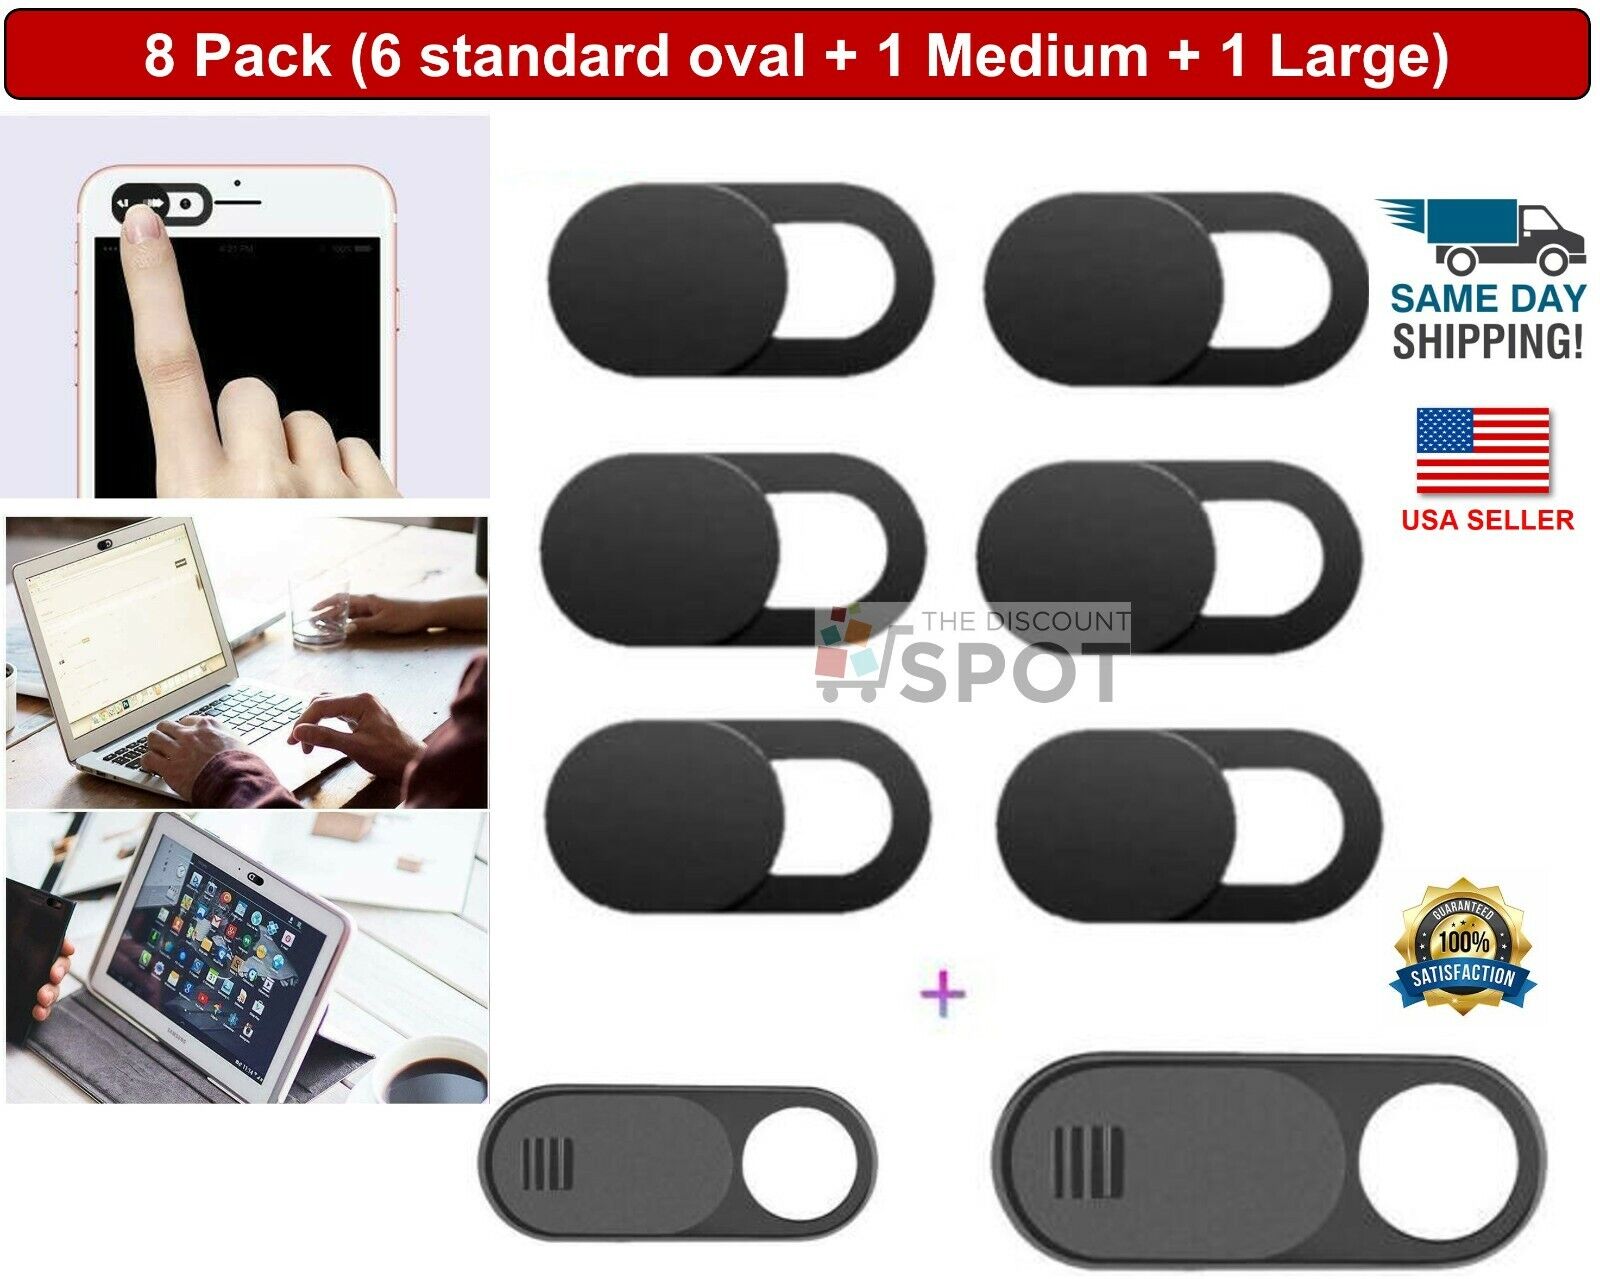 8PCS WebCam Cover Slide Camera Privacy Security Protect Sticker For Phone Laptop